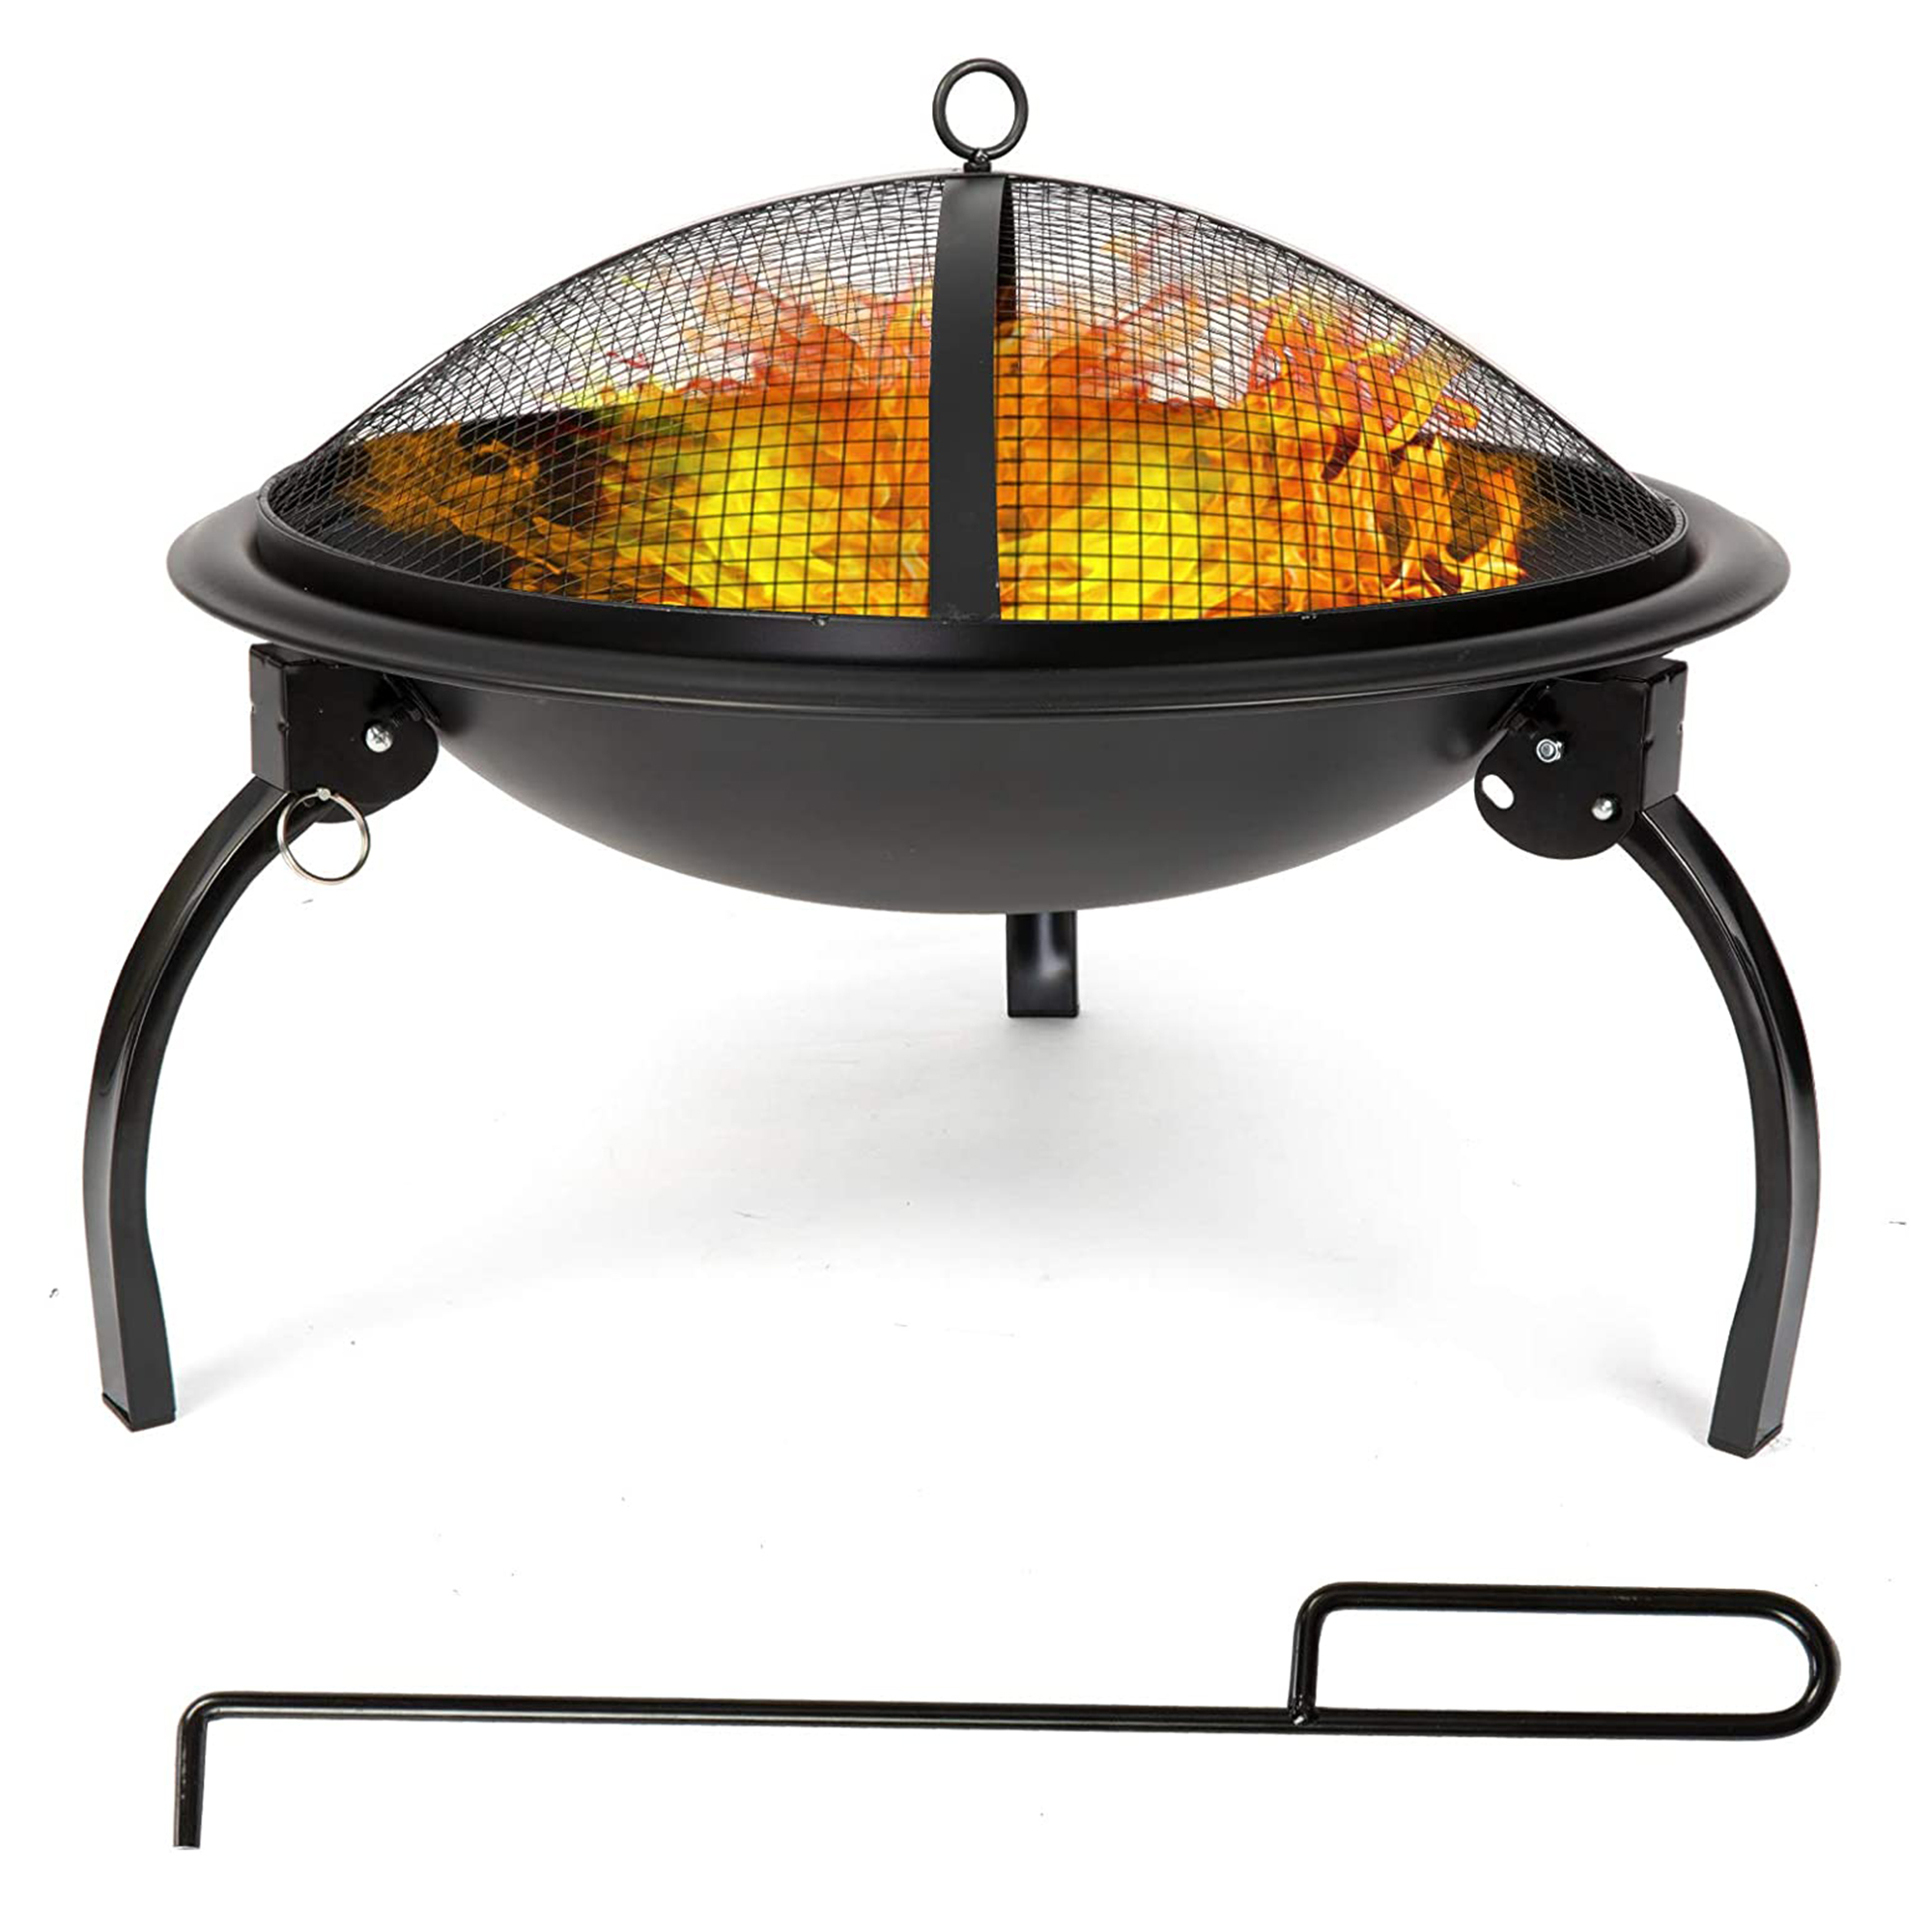 KARMAS PRODUCT 21'' Portable Fire Pit Outdoor Wood Burning BBQ Grill Firepit Bowl with Mesh Spark Screen Cover Fire Poker for Backyard Garden Camping Picnic Beach Park - image 1 of 7